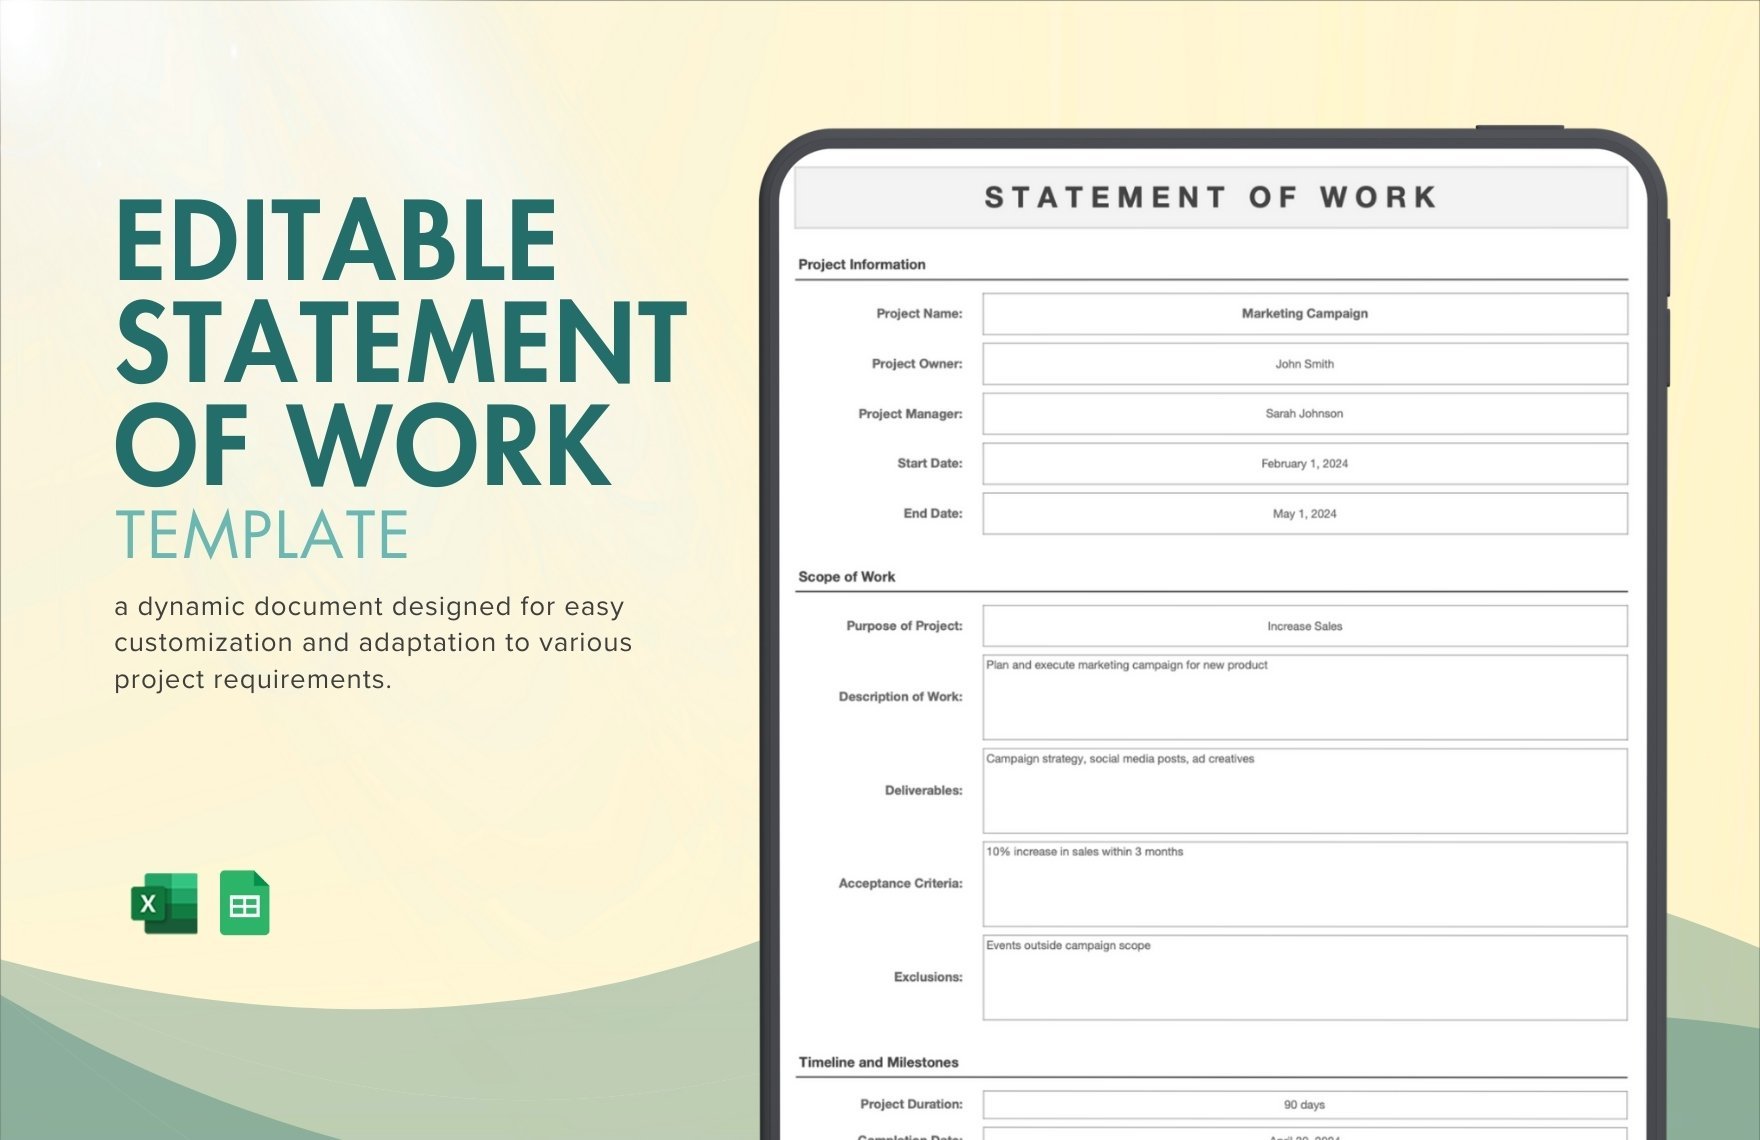 Editable Statement of Work Template